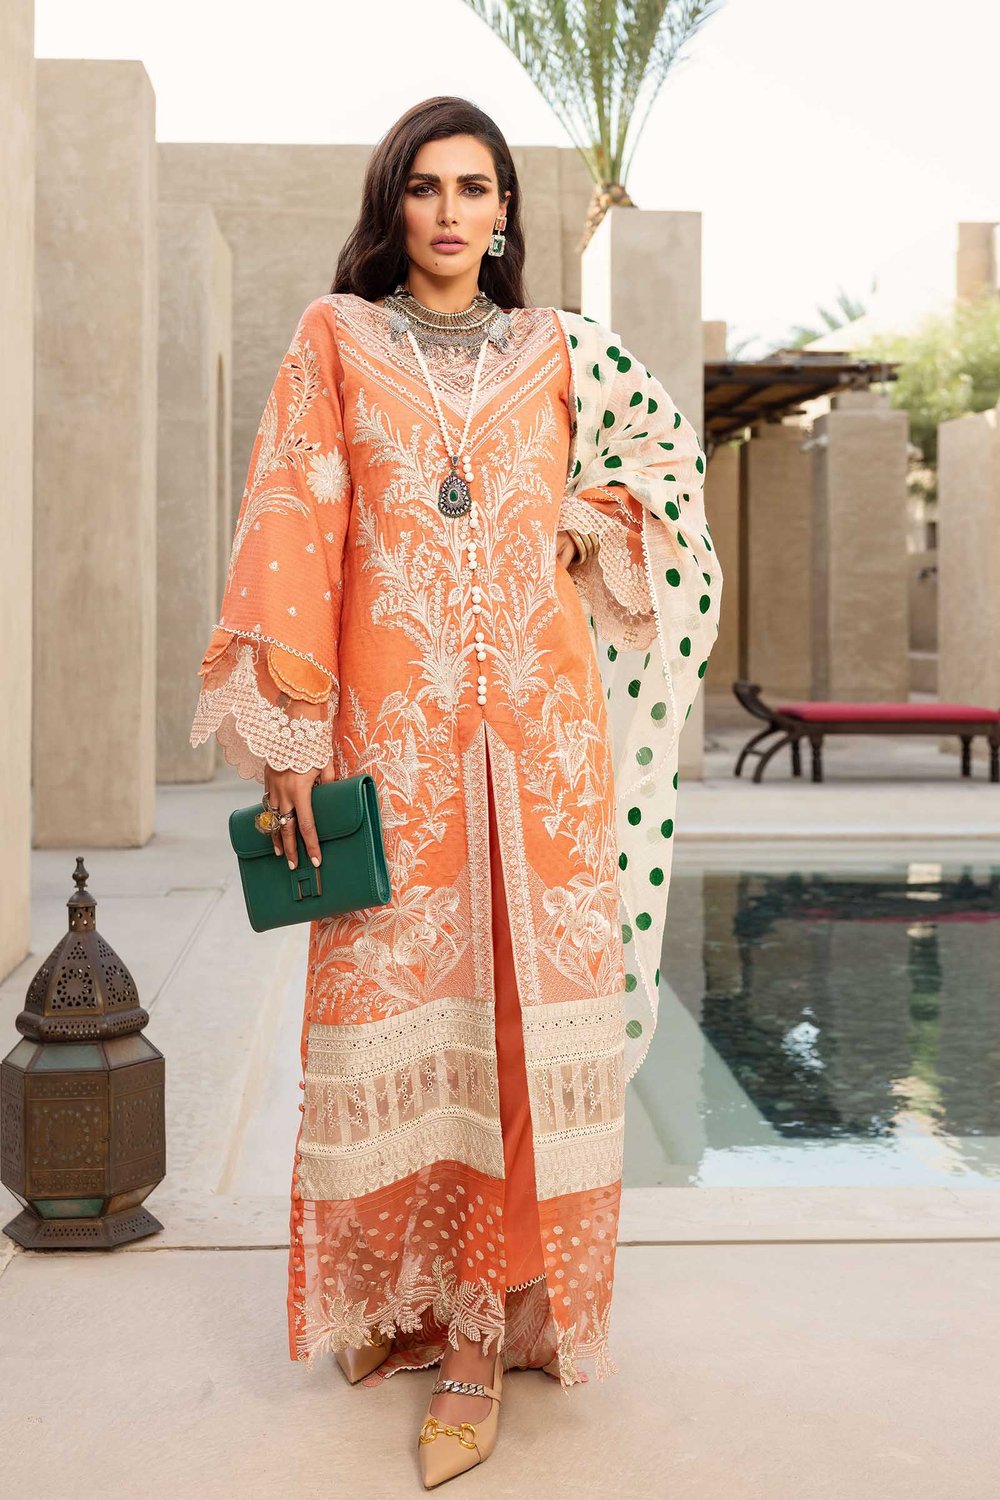 Buy Shiza Hassan Luxury Lawn 2021 | PARIZA | 5B Peach lawn 2021 dress from our official website. We are largest stockists of Eid luxury lawn dresses, Maria b Eid Lawn 2021, Shiza Hassan Luxury Lawn 2021. Buy unstitched, customized & Party Wear Eid collection '21 online in USA UK Manchester from Lebaasonline at SALE!